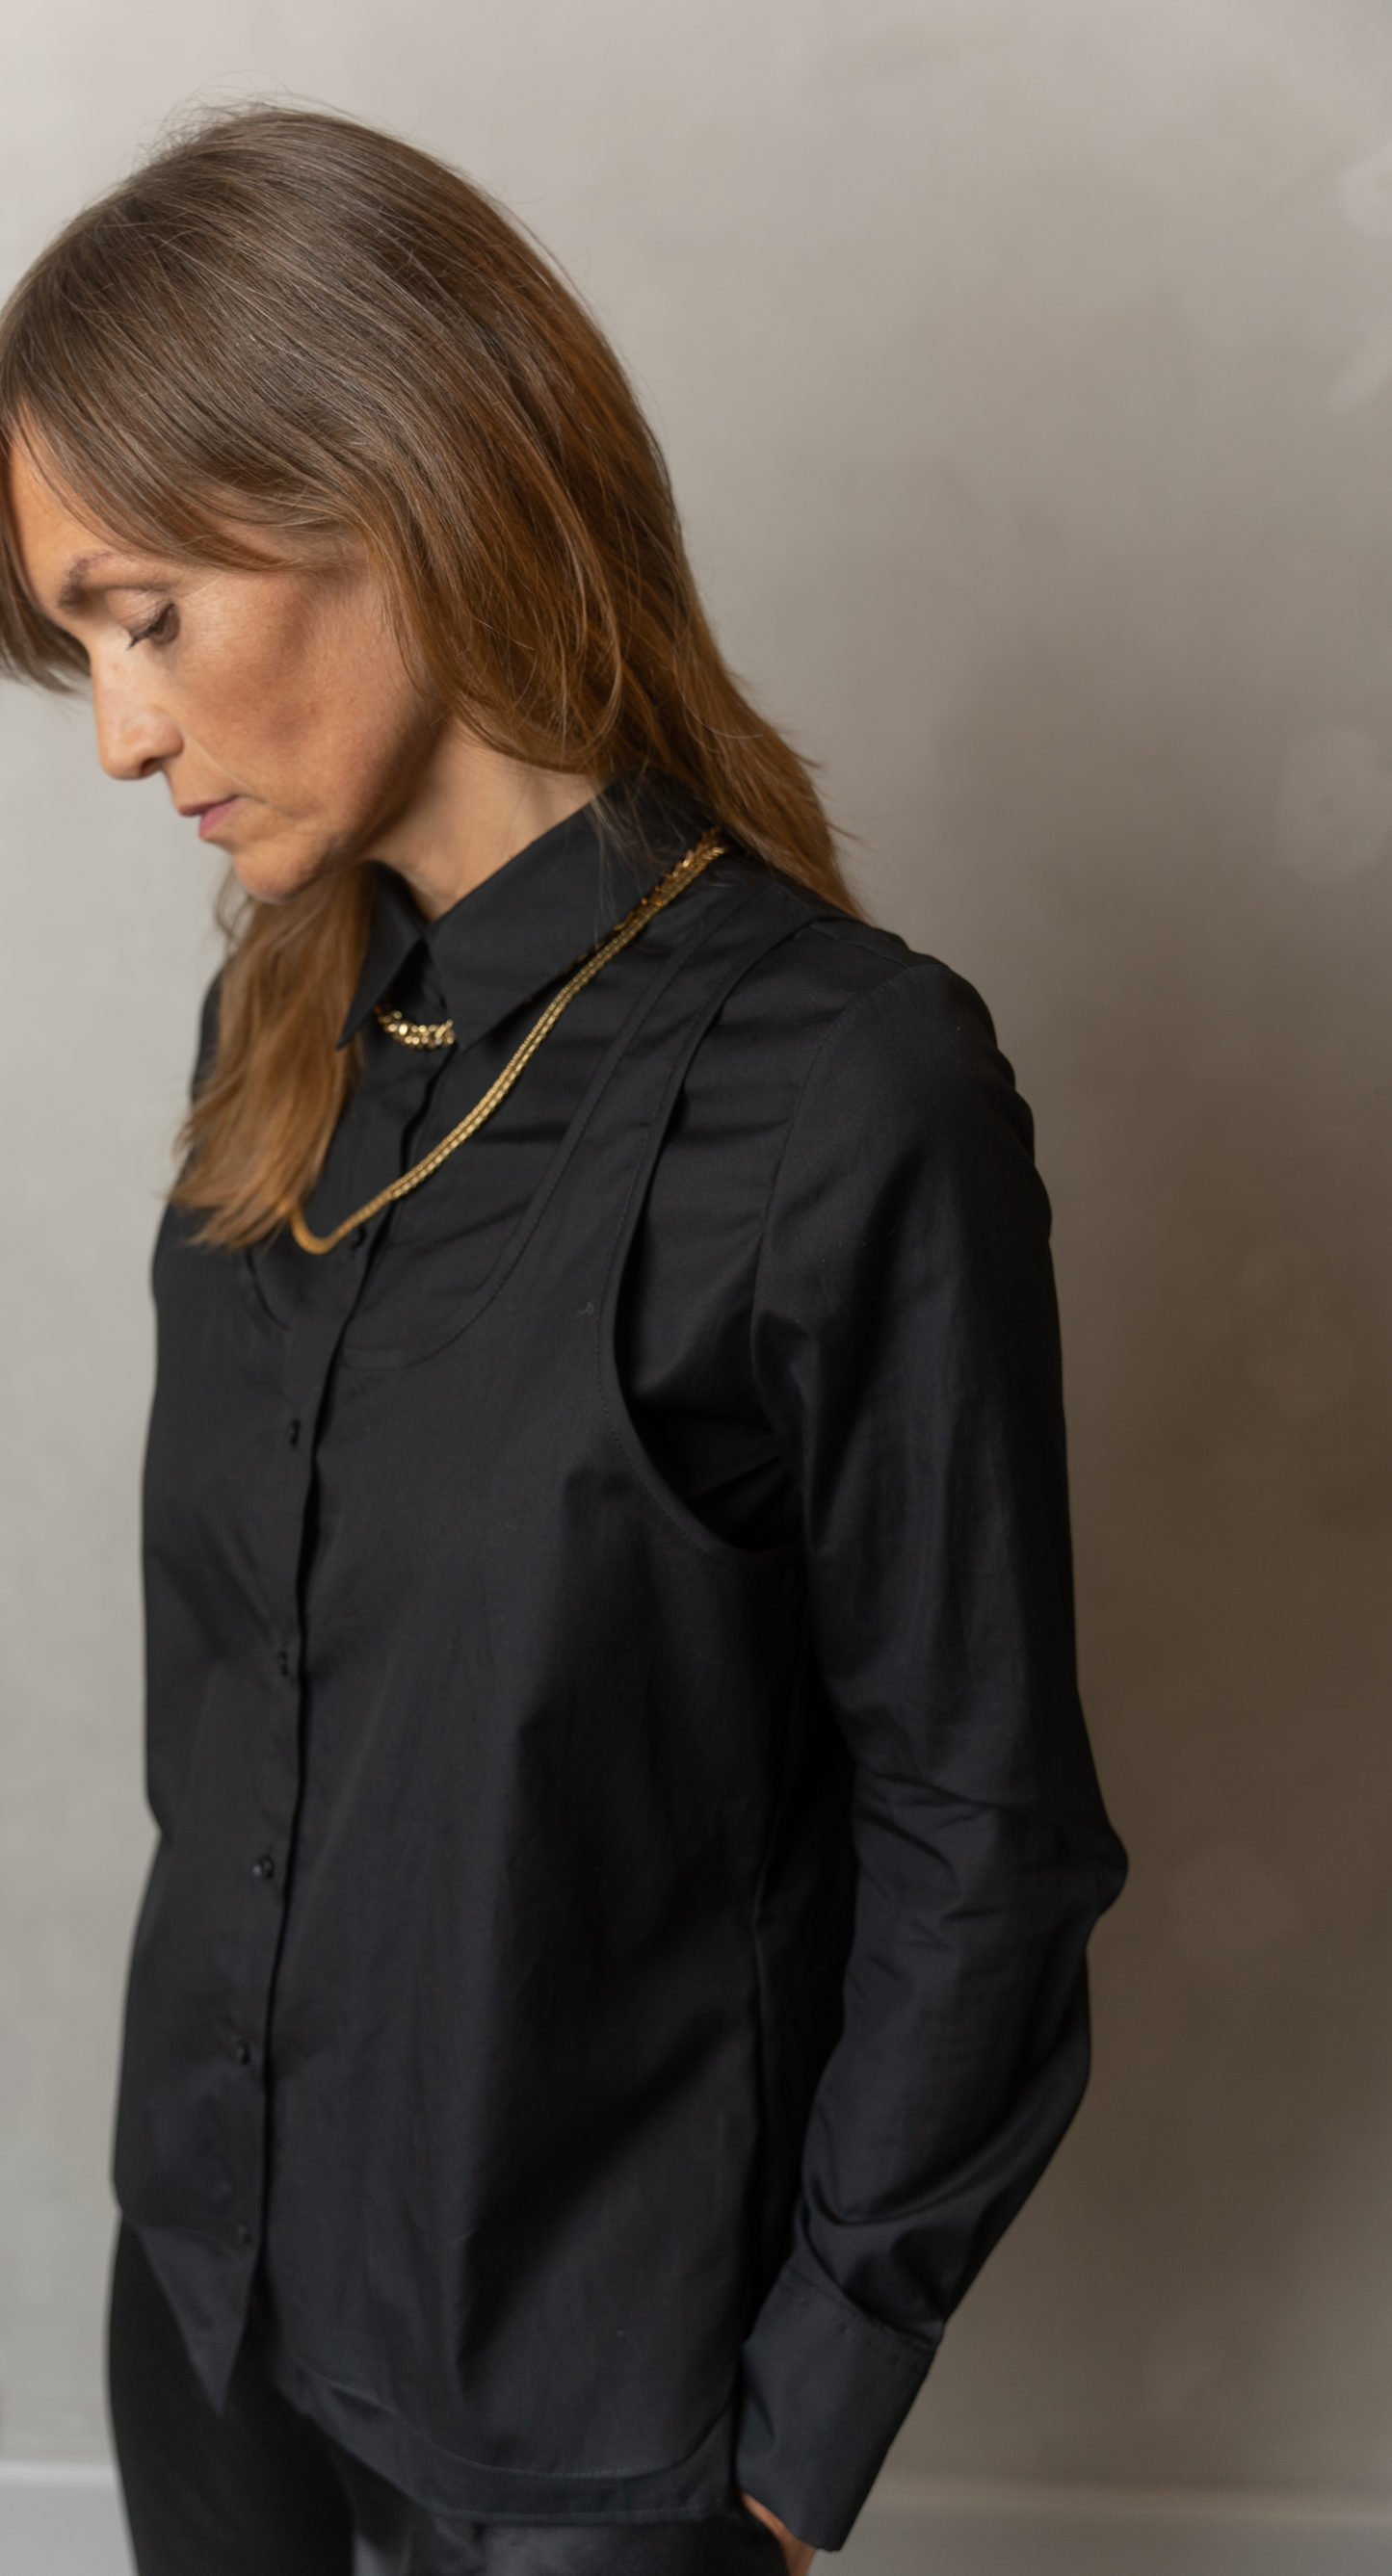 Women wearing Abbey shirt black paired with Agnes trousers (black) looking down..